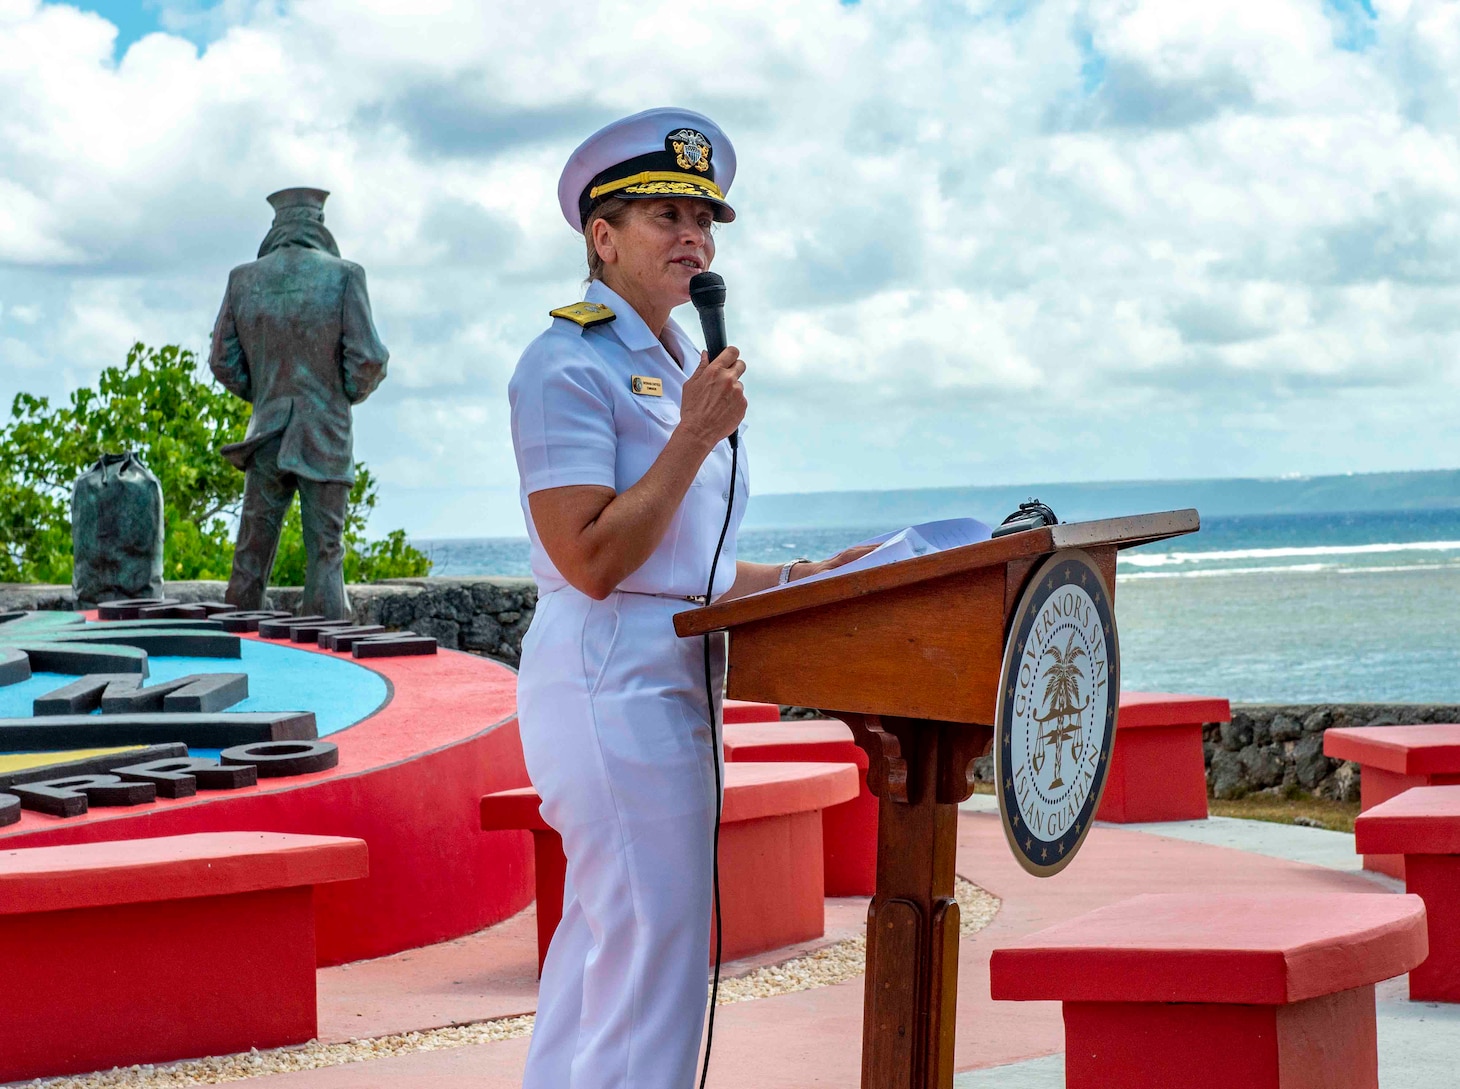 HAGÅTÑA, Guam (April 30, 2019) – Rear Adm. Shoshana Chatfield, commander, Joint Region Marianas, delivers remarks during an unveiling of the official plaques for the Lone Sailor statue at the Ricardo J. Bordallo Governor's
Complex in Hagåtña April 30. Local and military officials, and members of the Vietnamese-American community, attended the event at Lone Sailor statue, a symbol of the significant relationship between the Navy, the sea services, Guam, and the thousands of Vietnamese citizens who found refuge on the island during Operation New Life in the ending days of the Vietnam War.